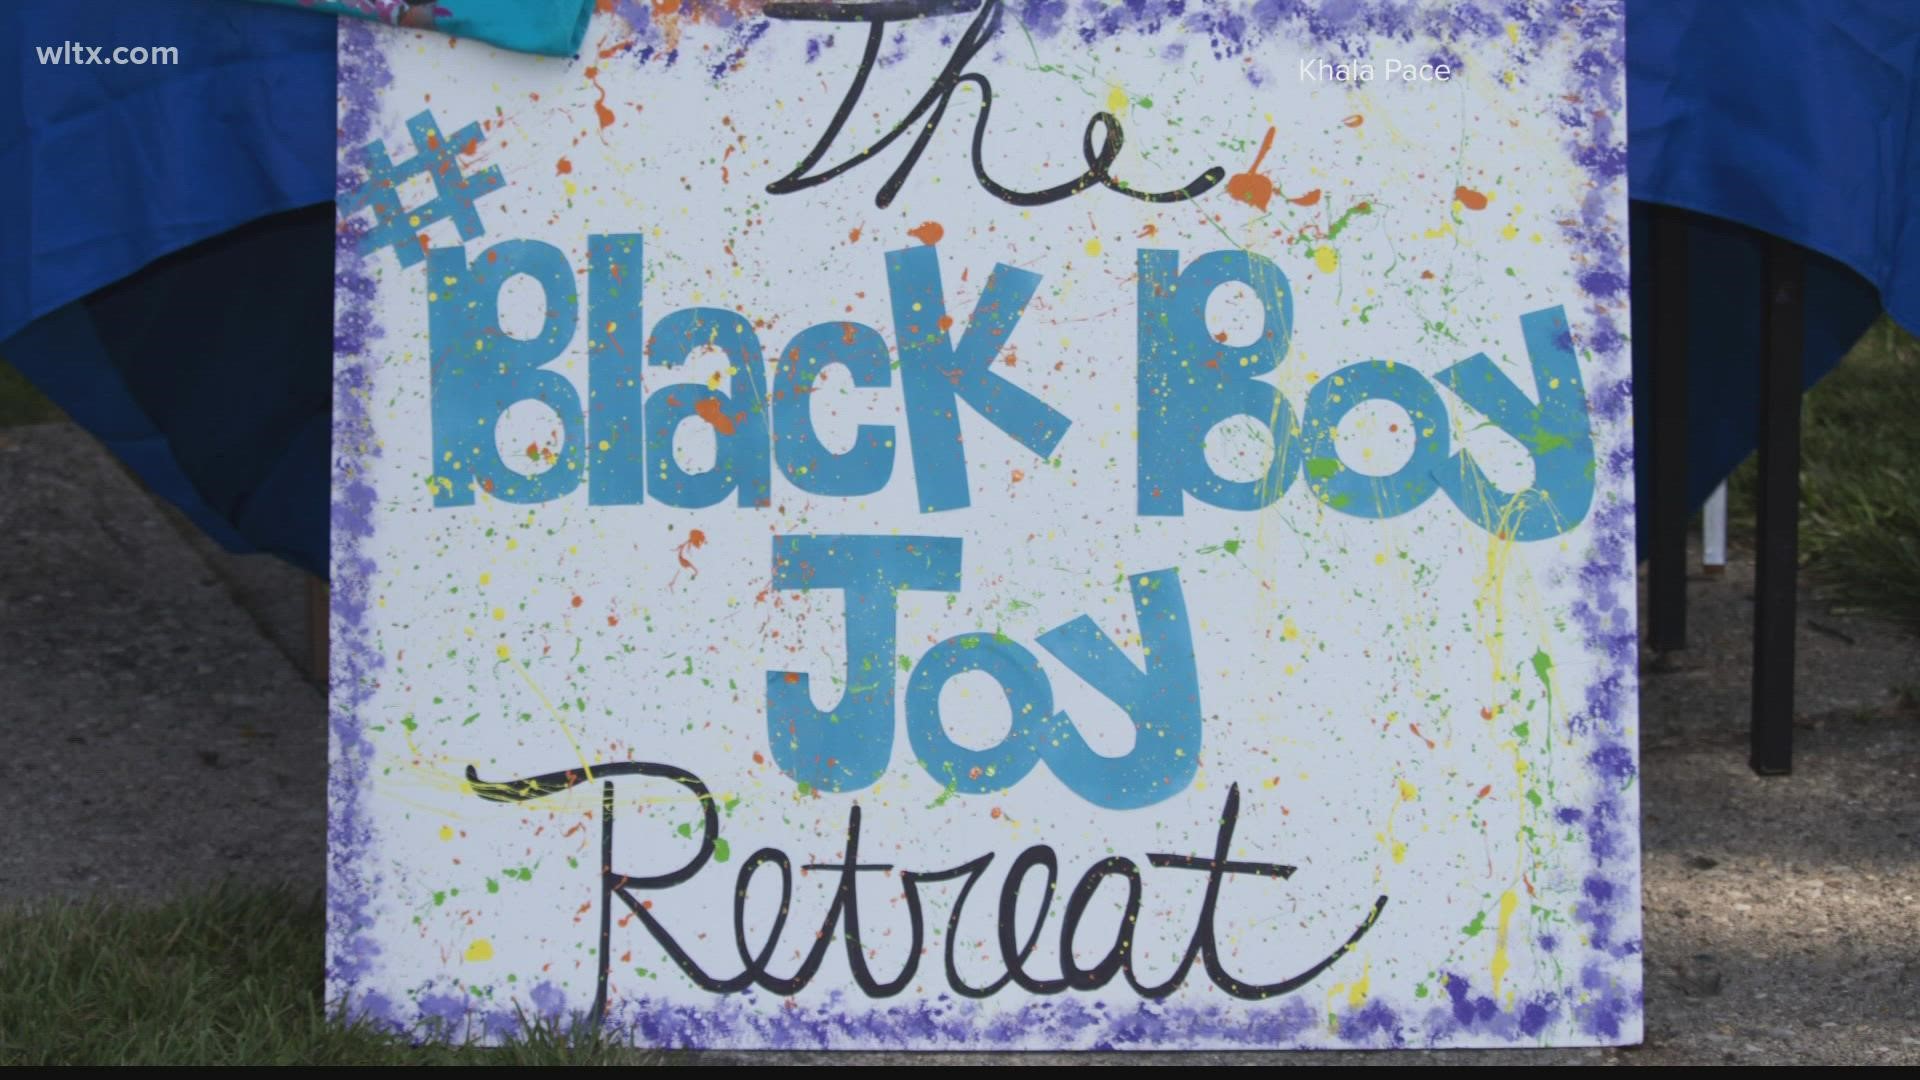 The camp called, "Black Boy Joy Retreat" is giving 20 young boys a safe space to build self-esteem